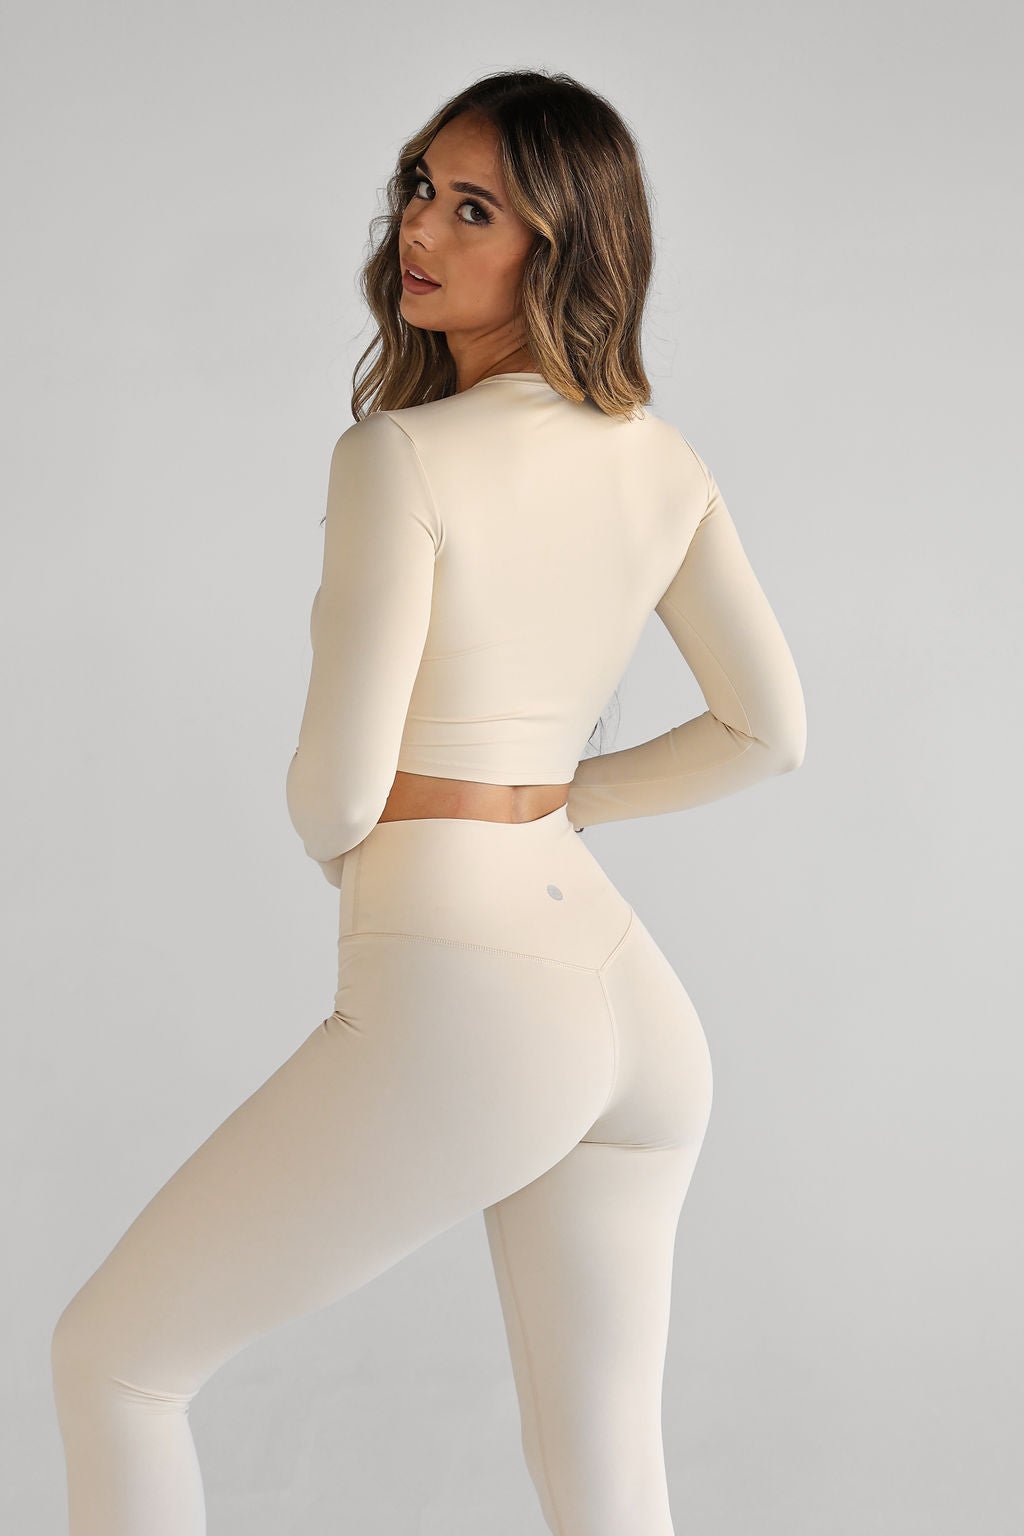 SCULPT Long Sleeve Crop - French Vanilla, 5 Star Rated